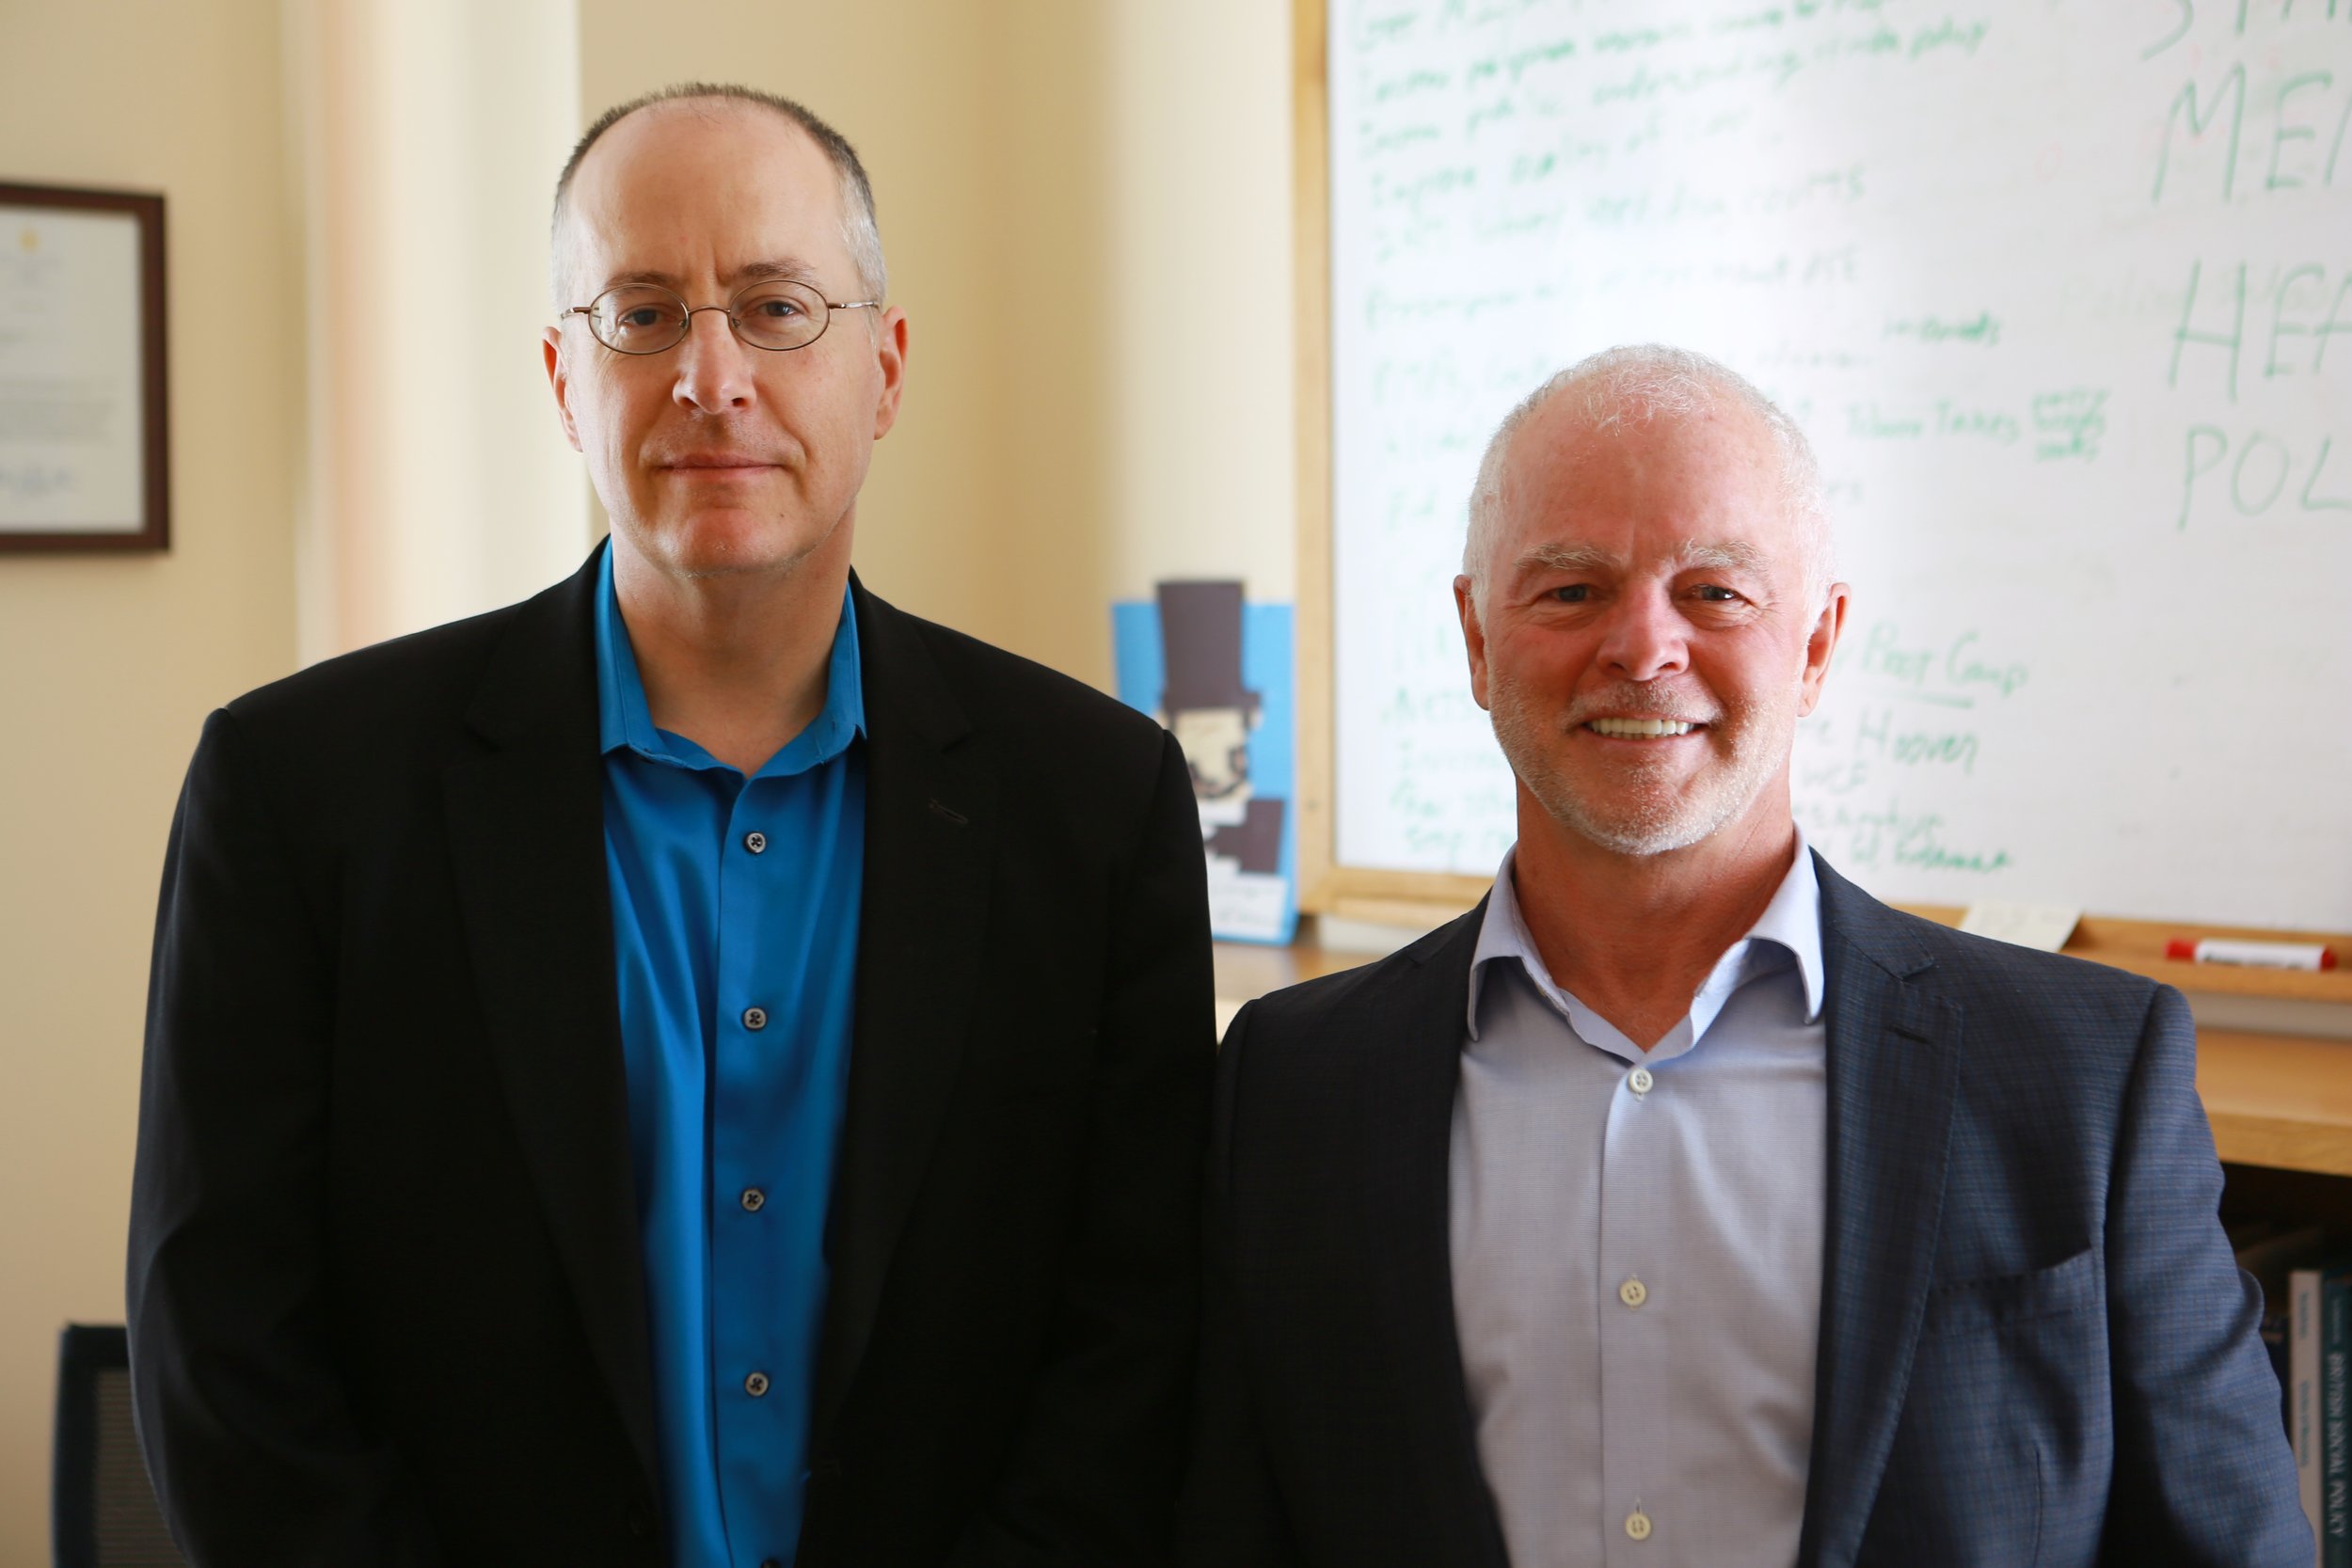 10-Mike Pond with Dr Keith Humphreys at Stanford University.jpg